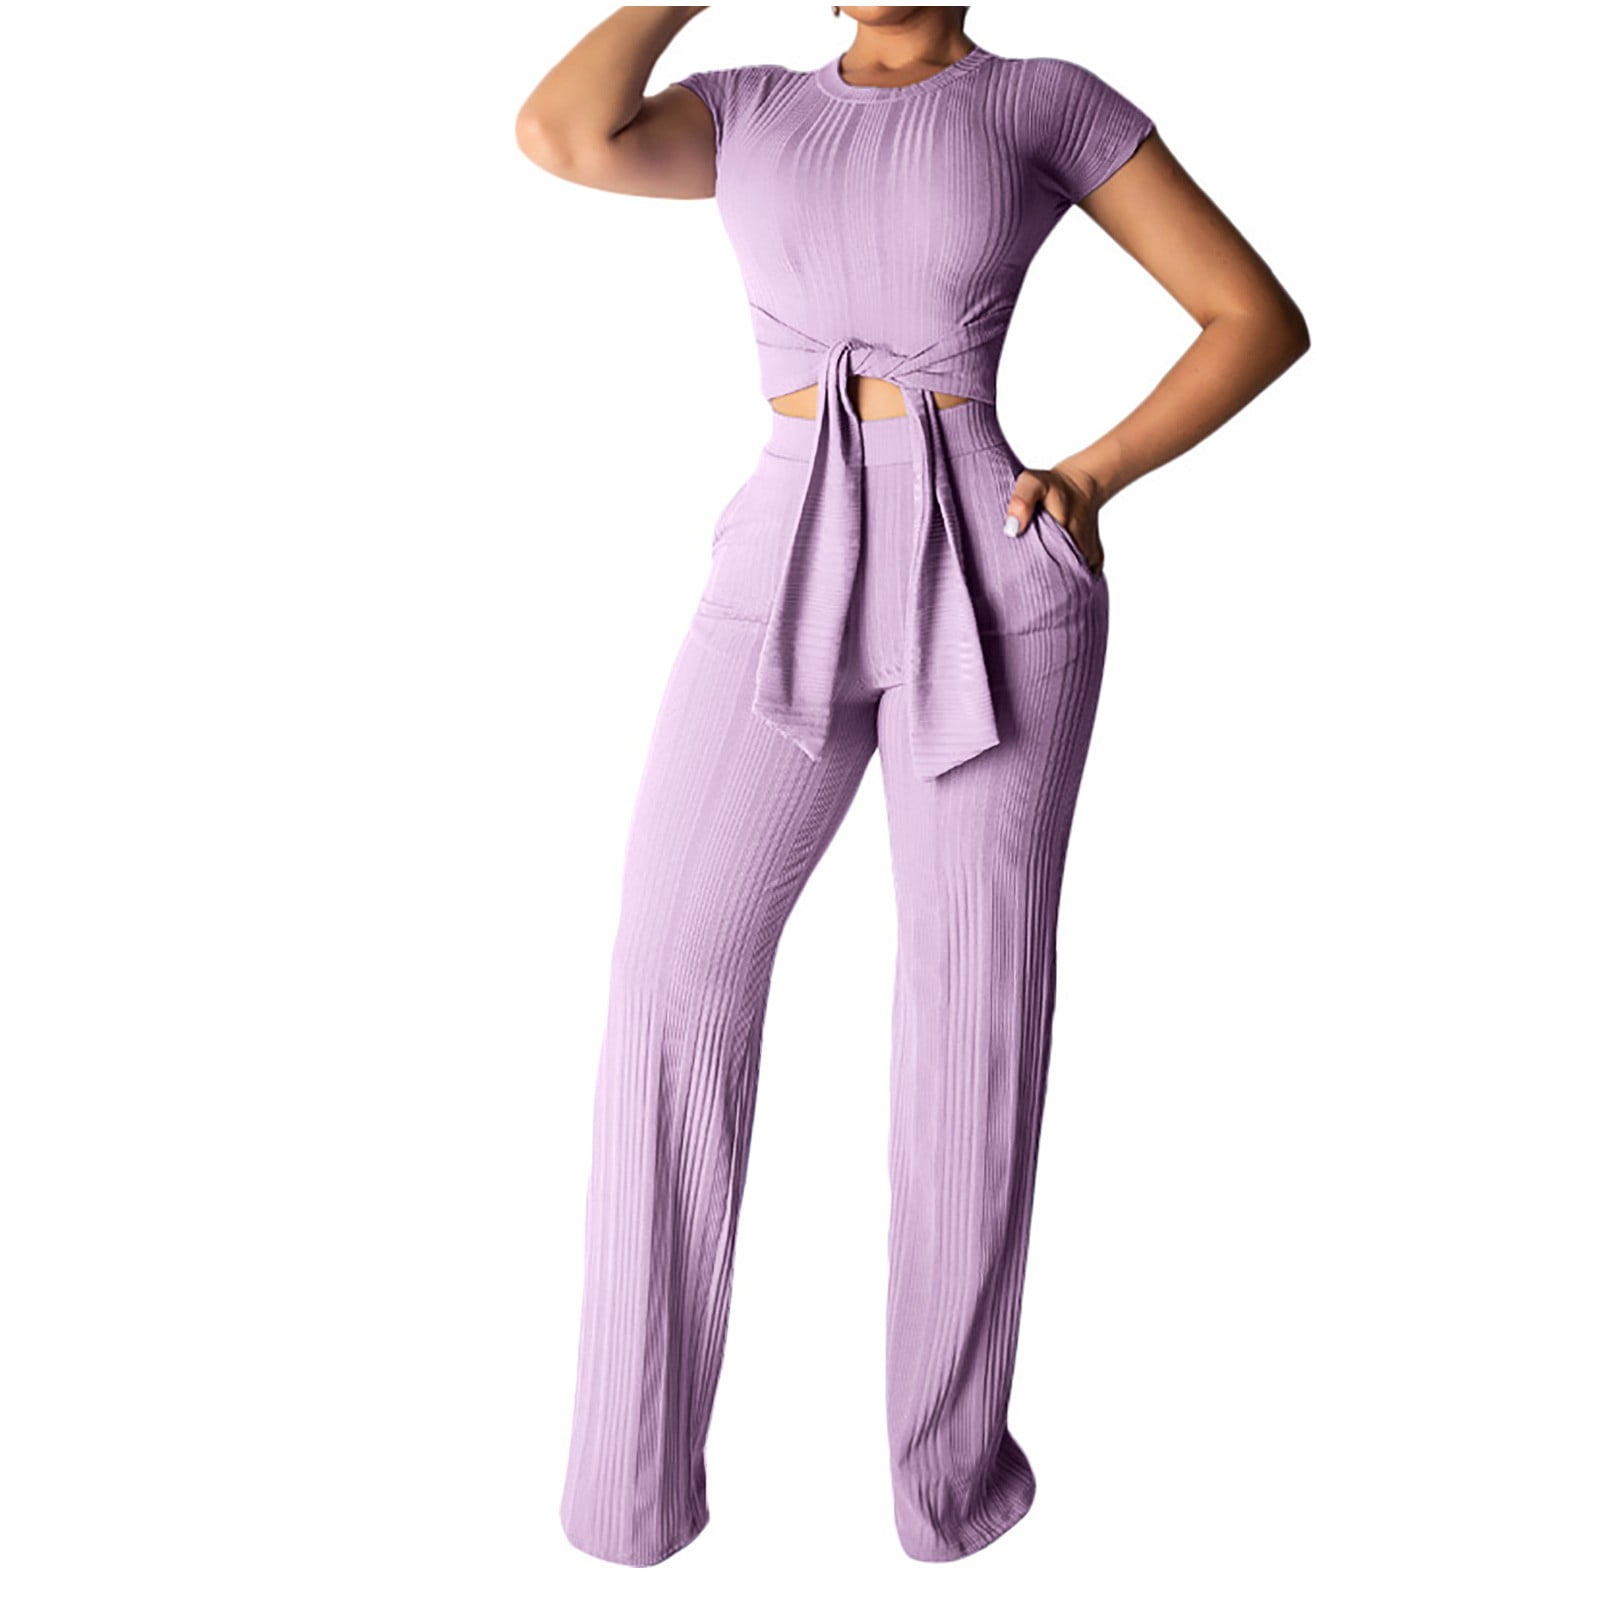 REORIAFEE 60s Outfits for Women Beach Outfits Women's Fashion Stripe Casual  Sports Tie Short Sleeve Pants Set Purple XL 